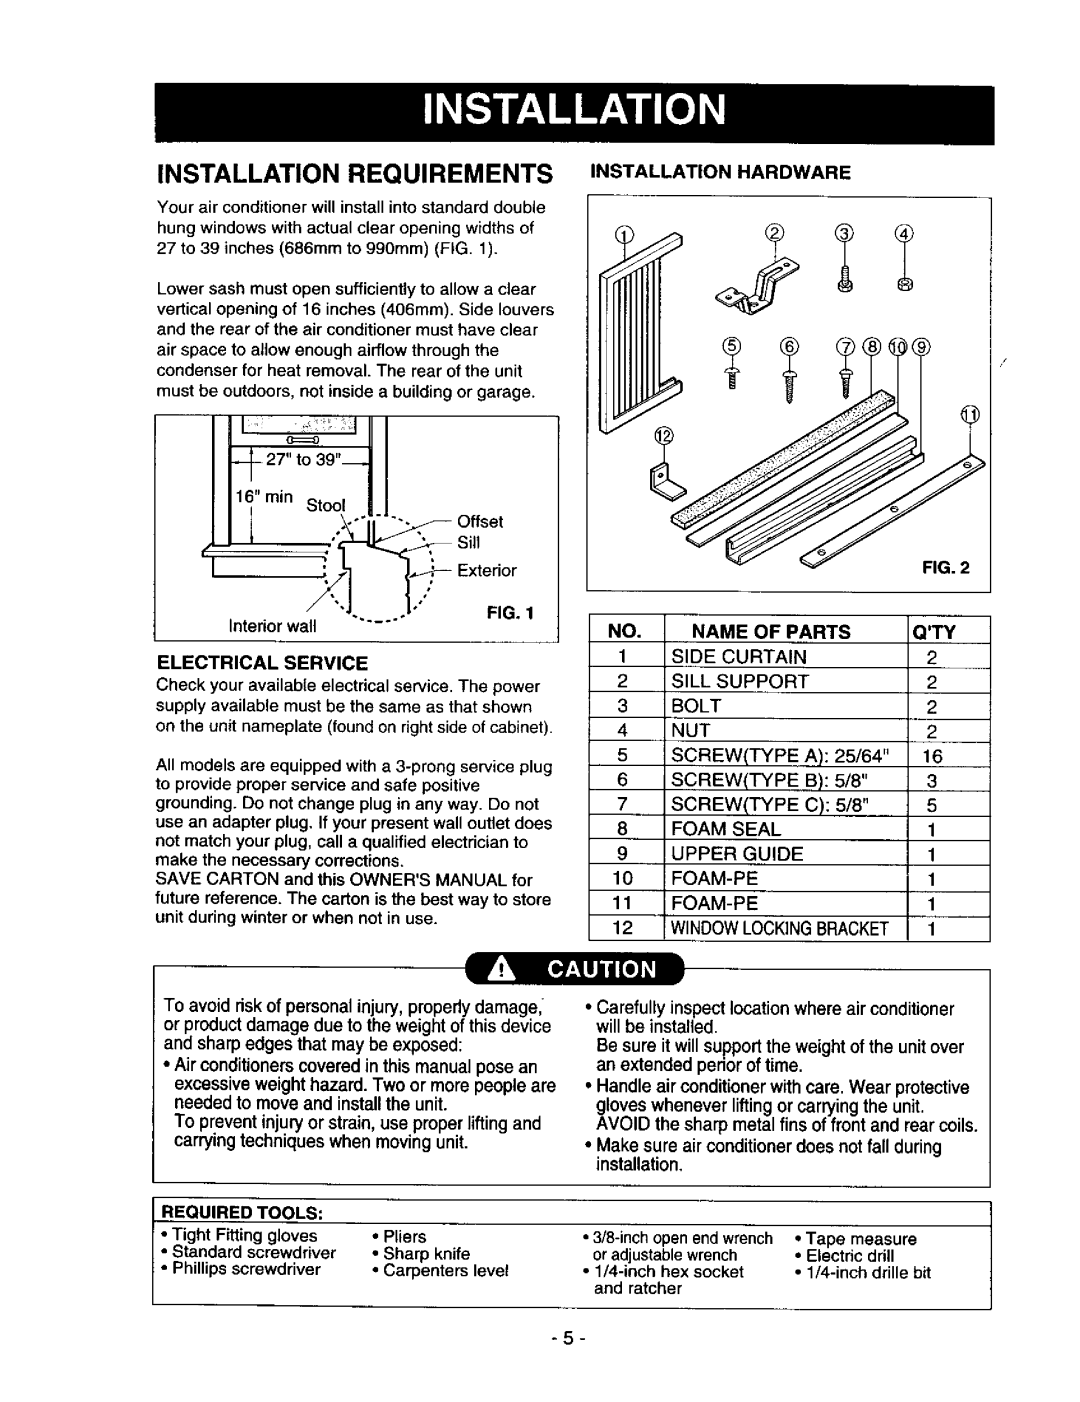 Kenmore 78122 owner manual Installation Requirements, • 1/4-inchdrille bit 